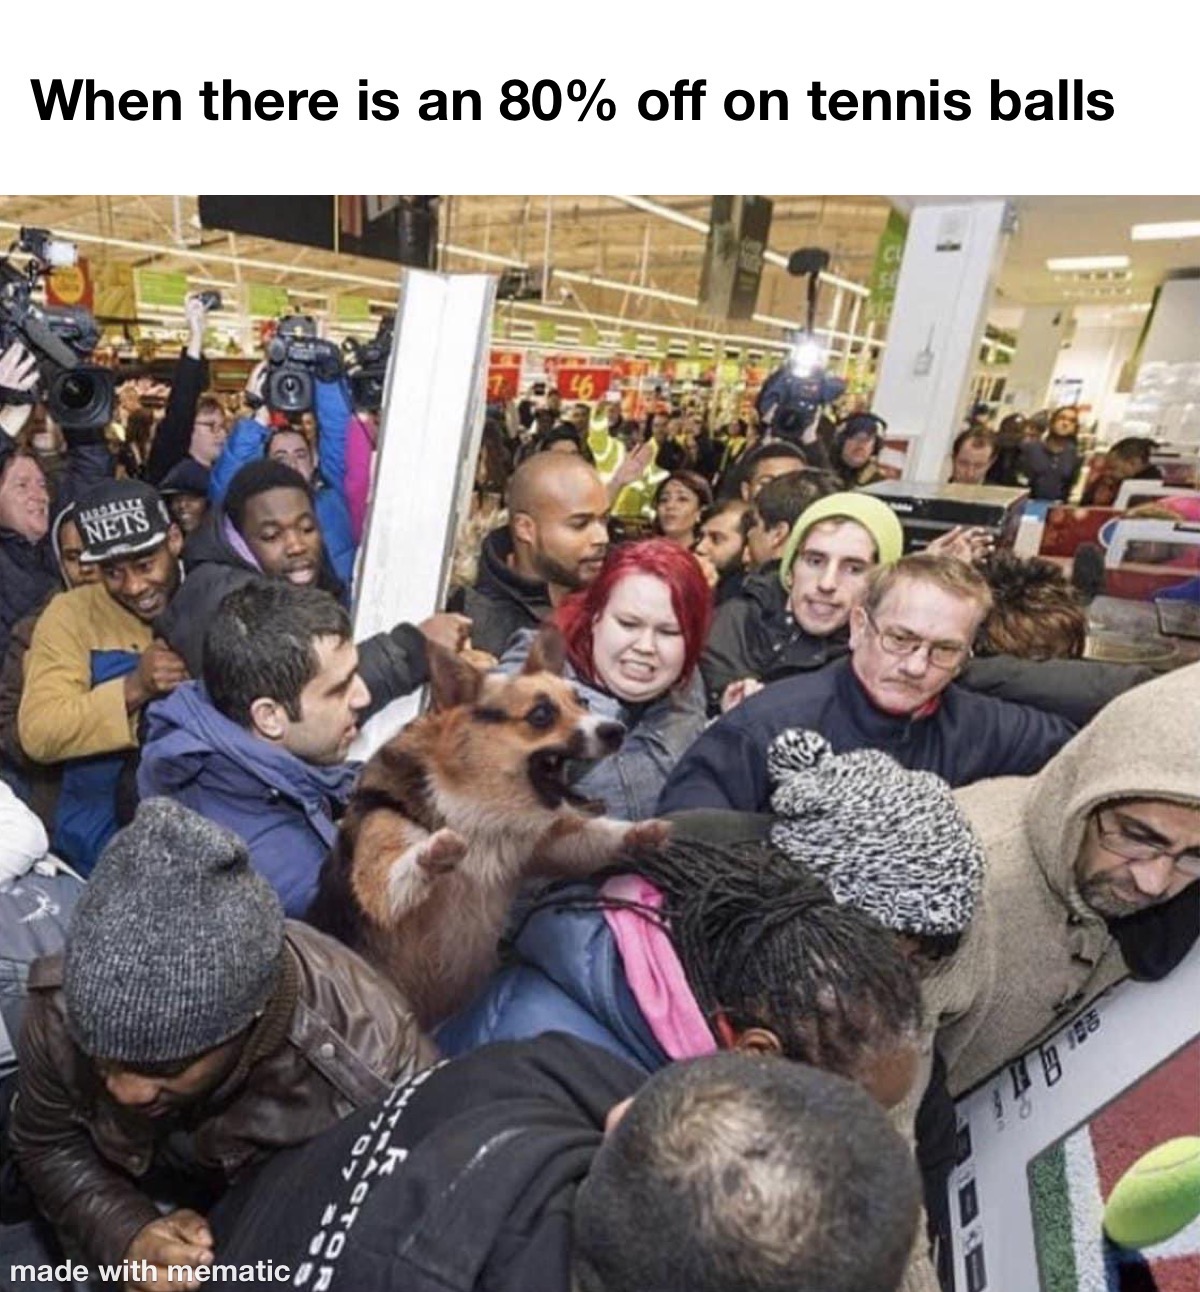 When There Is An 80% Off on Tennis Balls